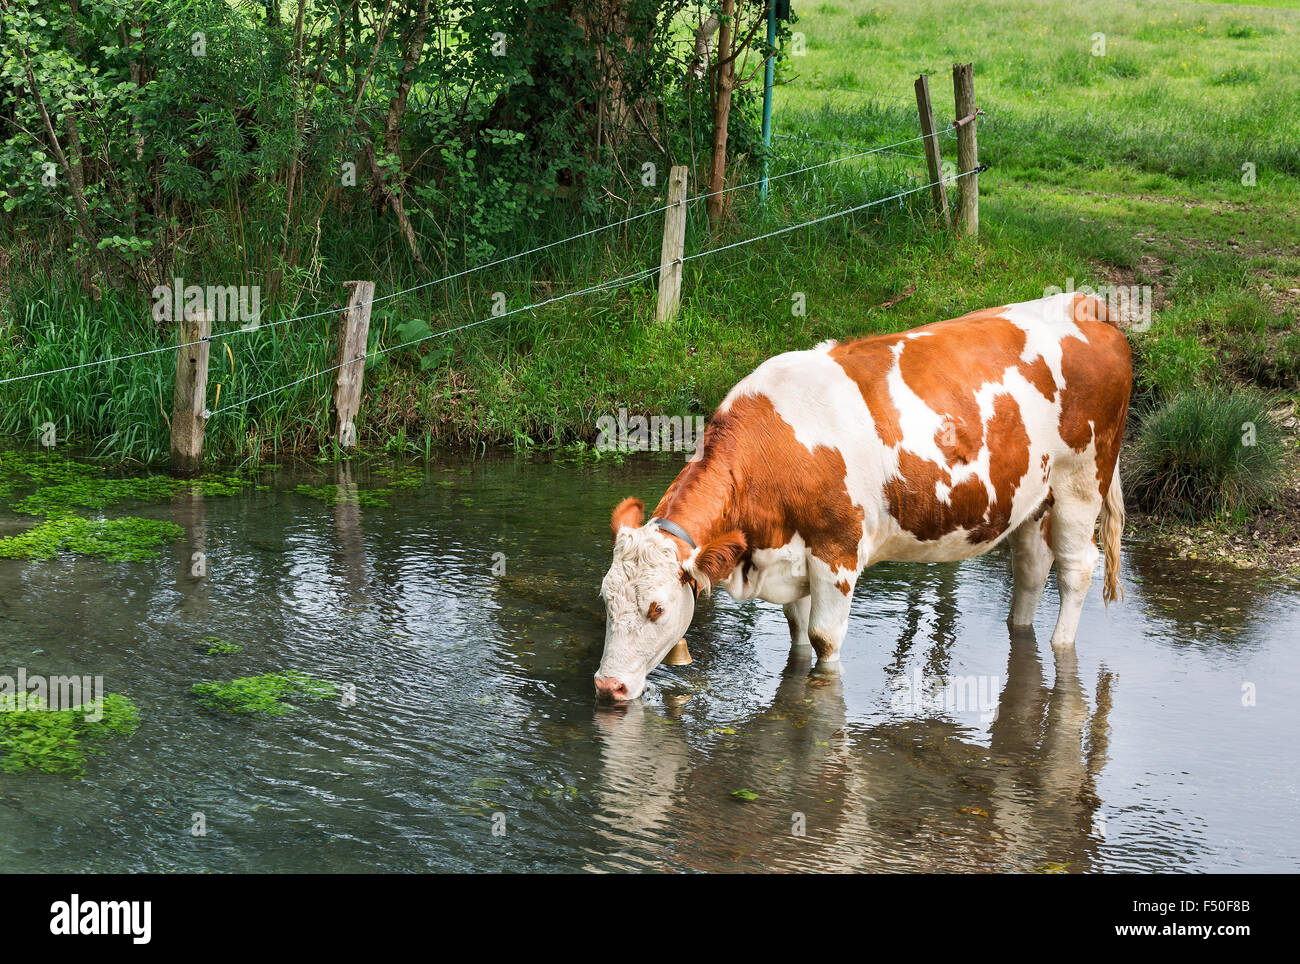 cow drinks water in the river Stock Photo